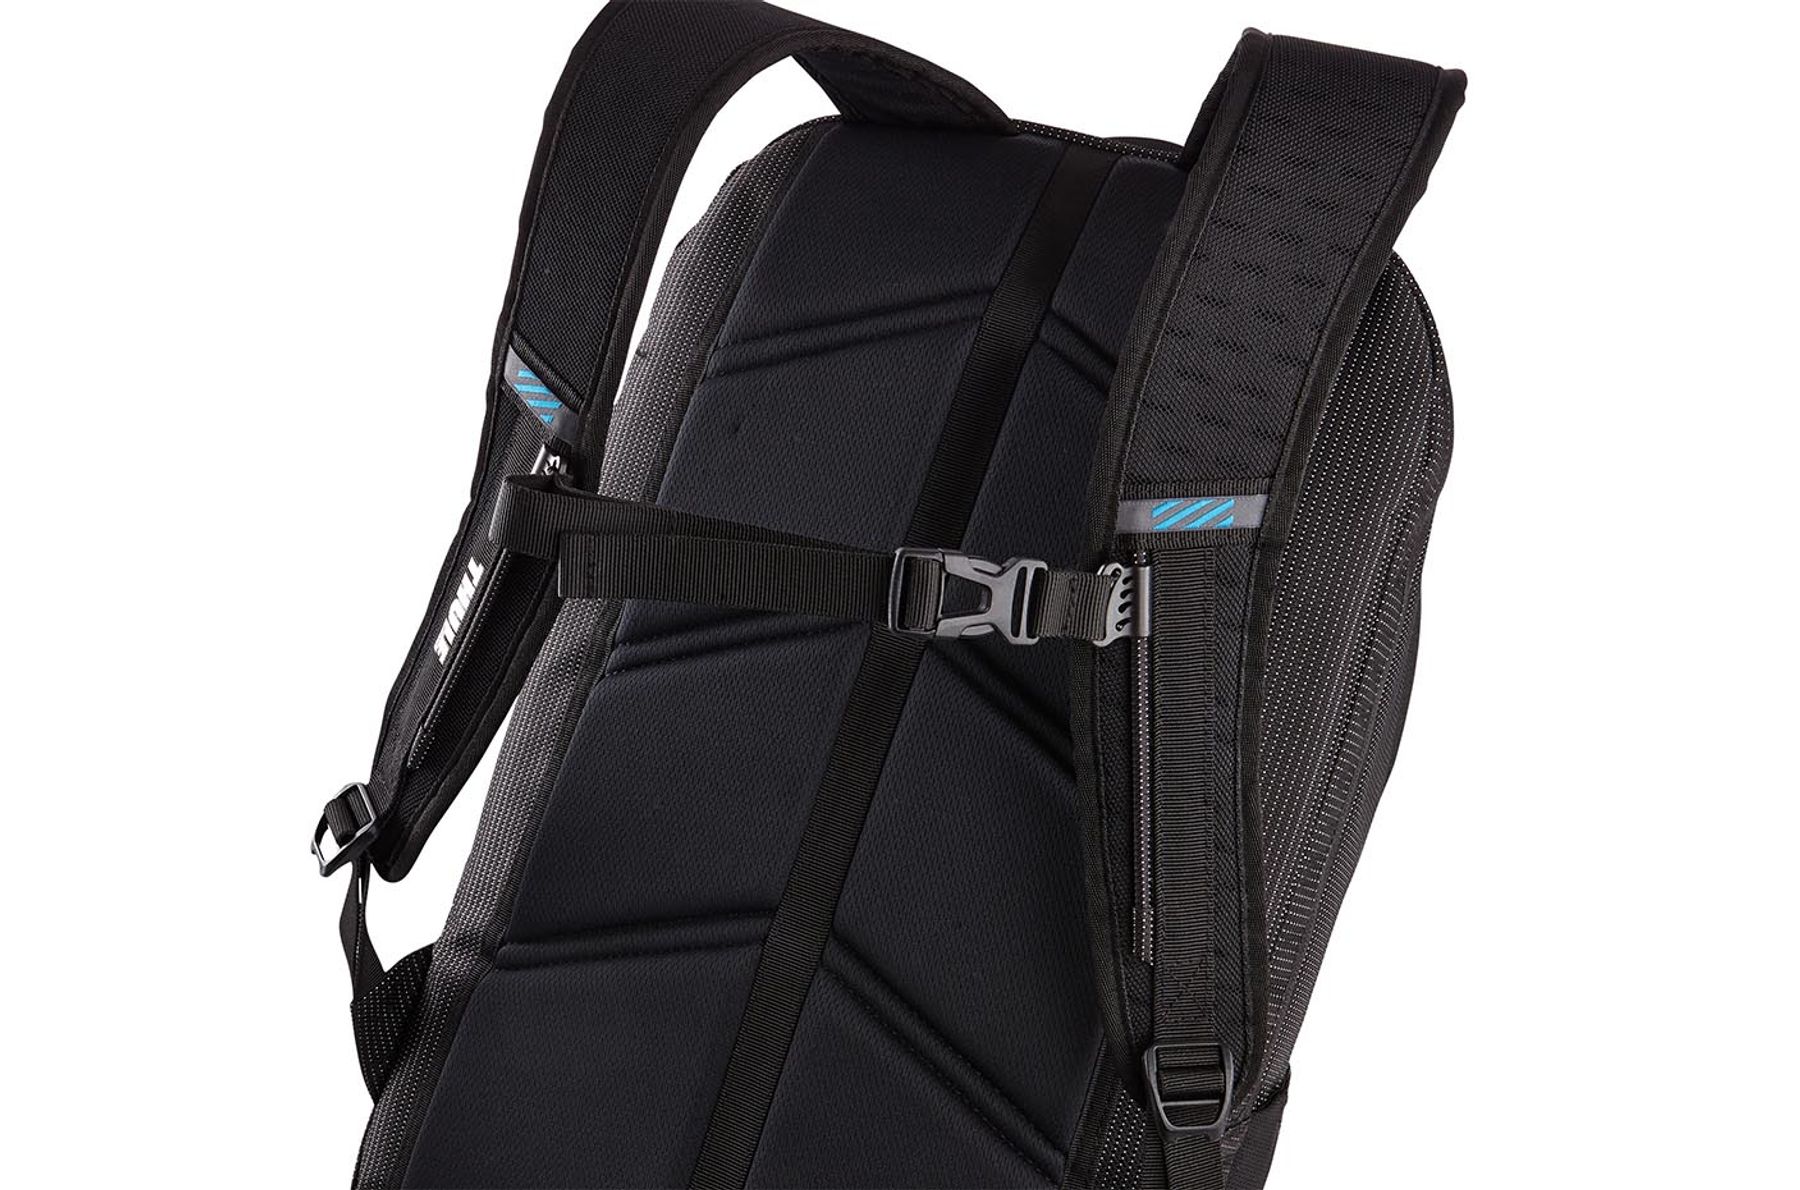 Shoulder straps with mesh covering and padded back panel